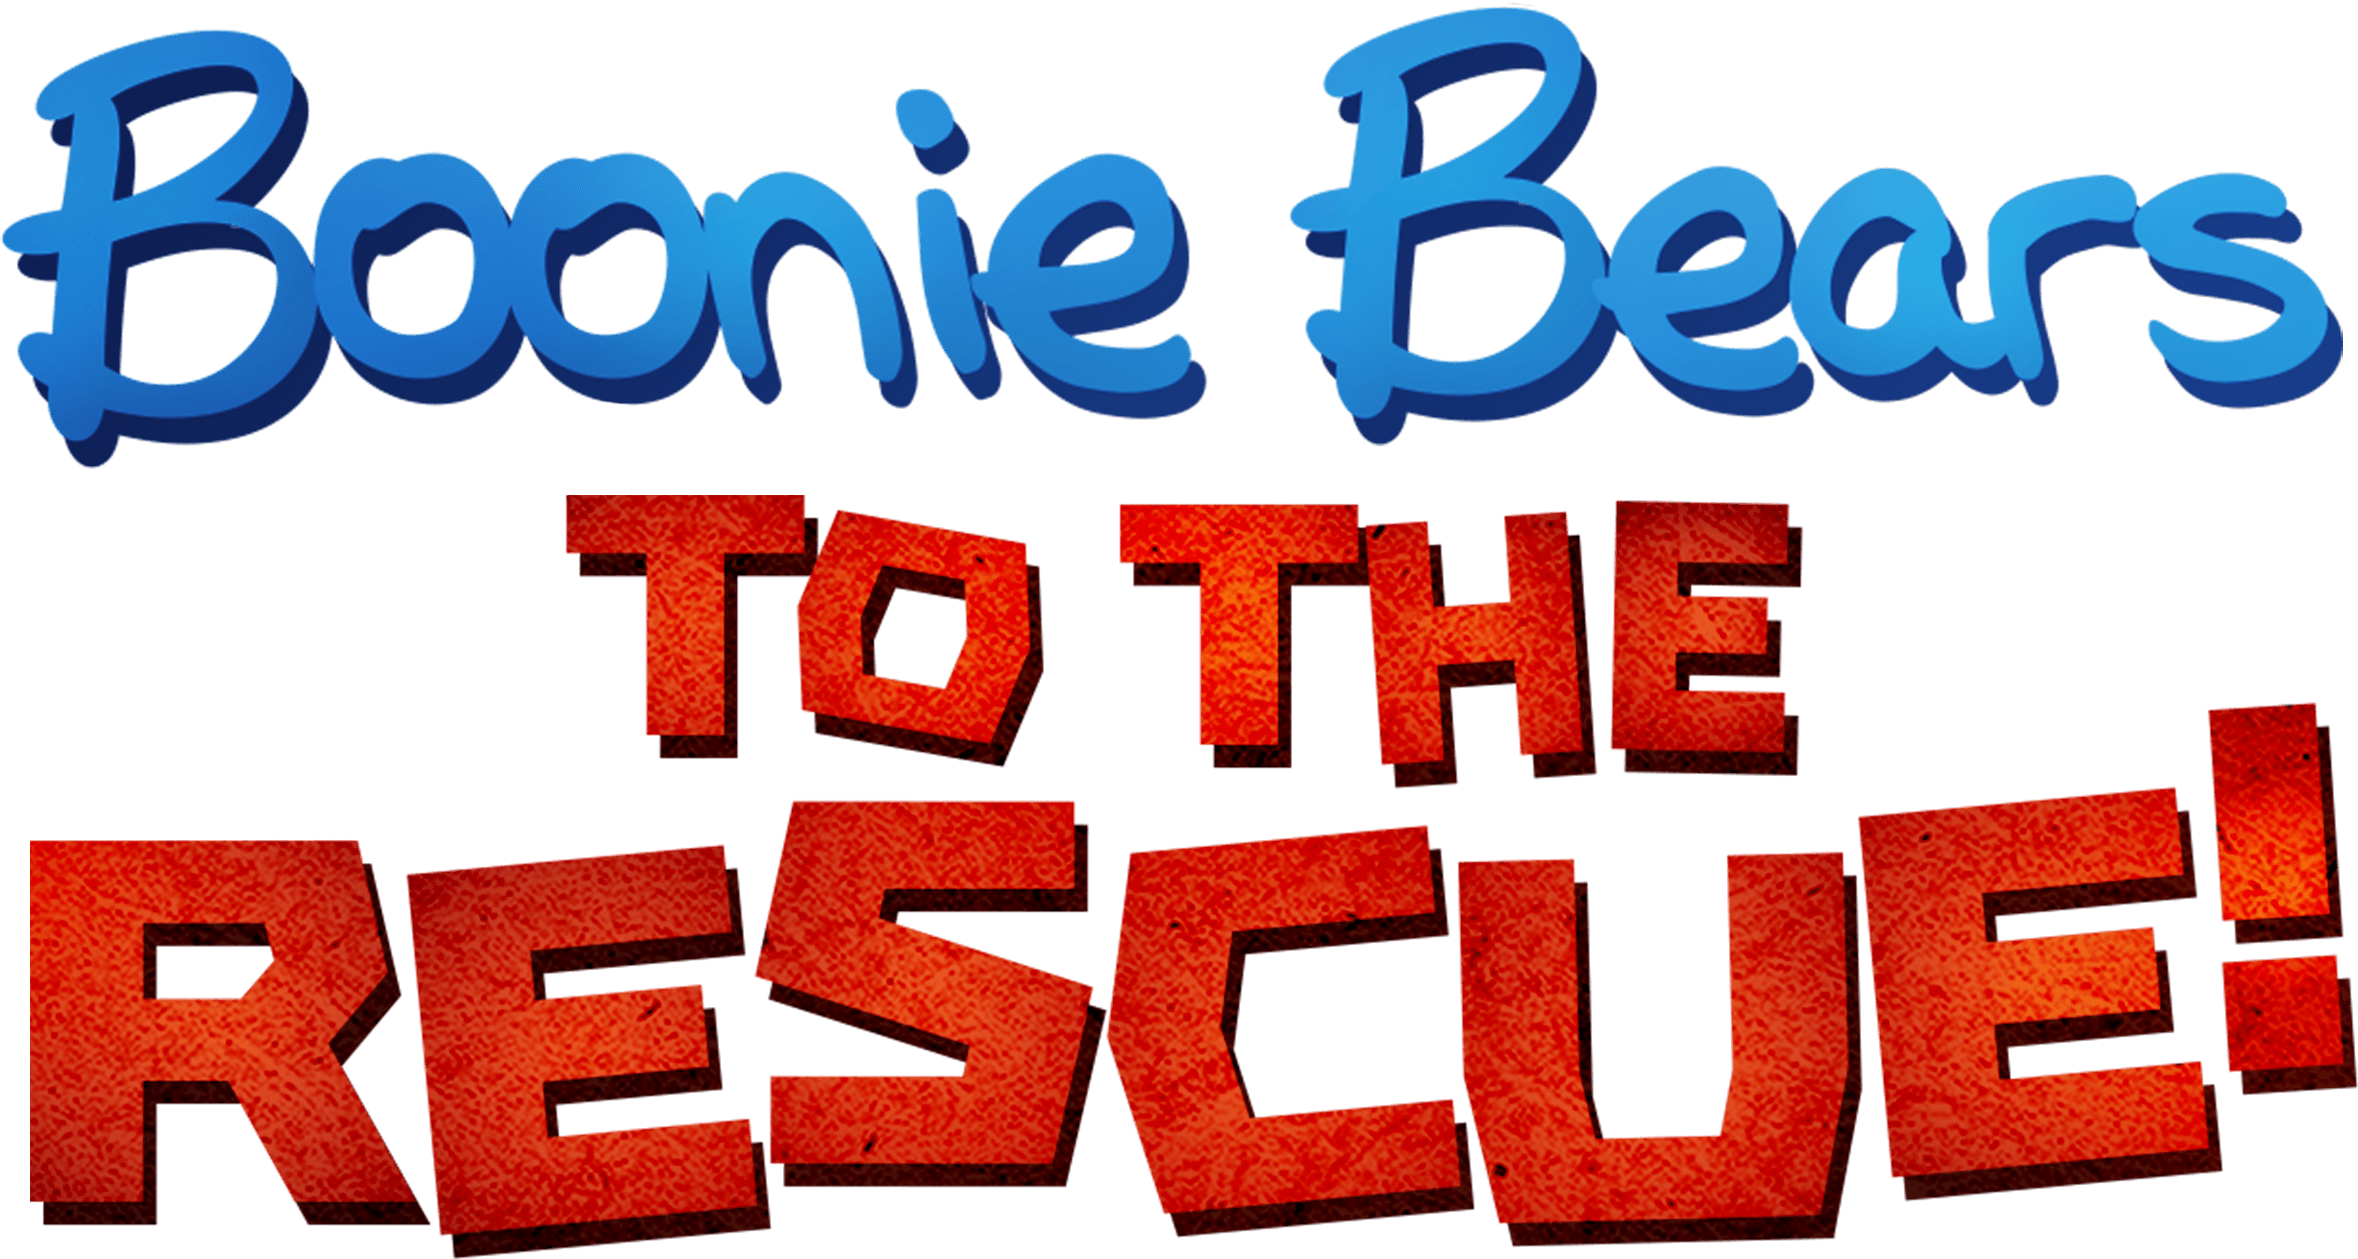 Boonie Bears: To the Rescue logo